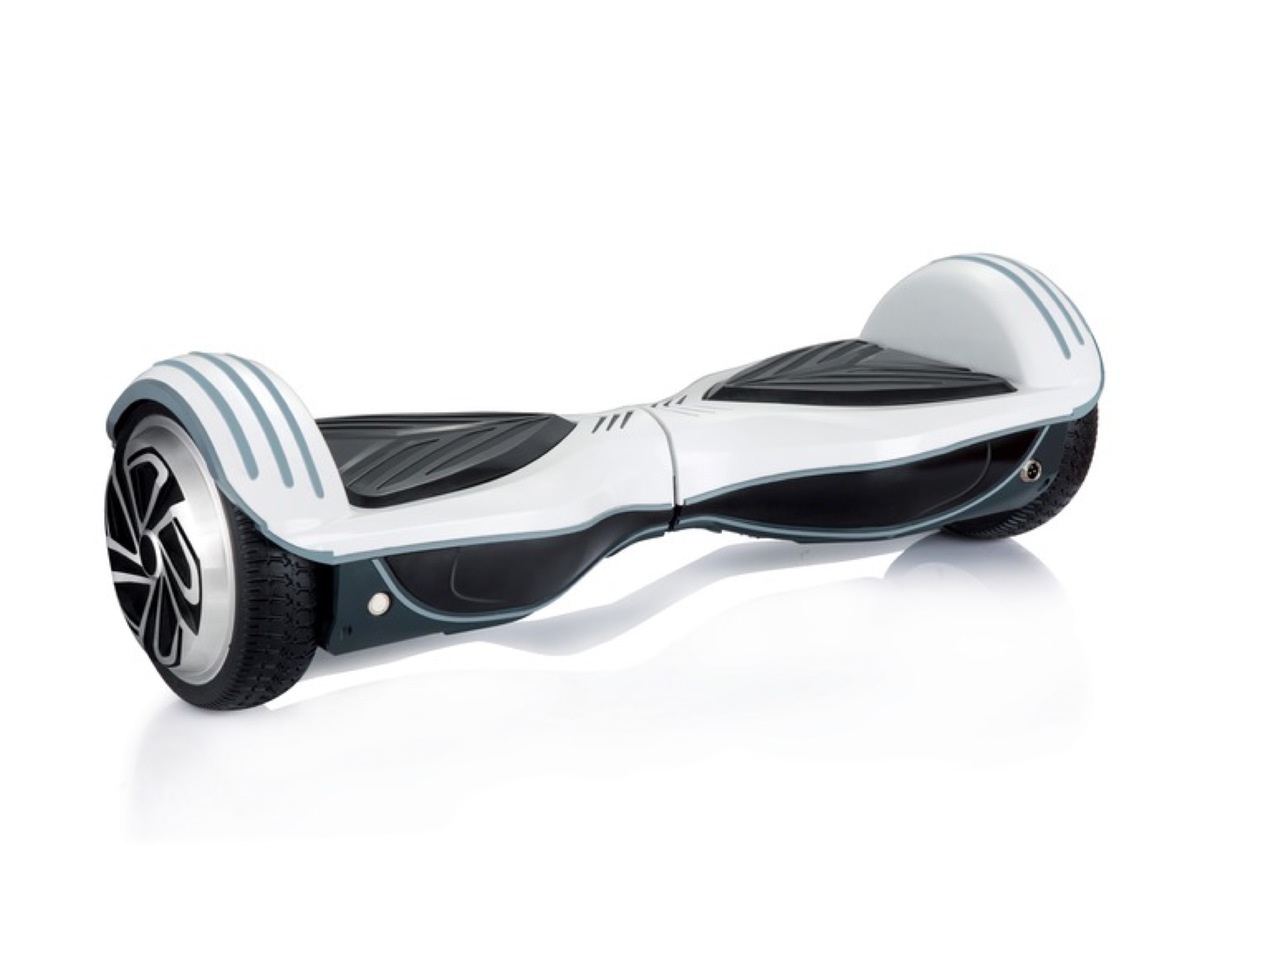 Hoverboard1